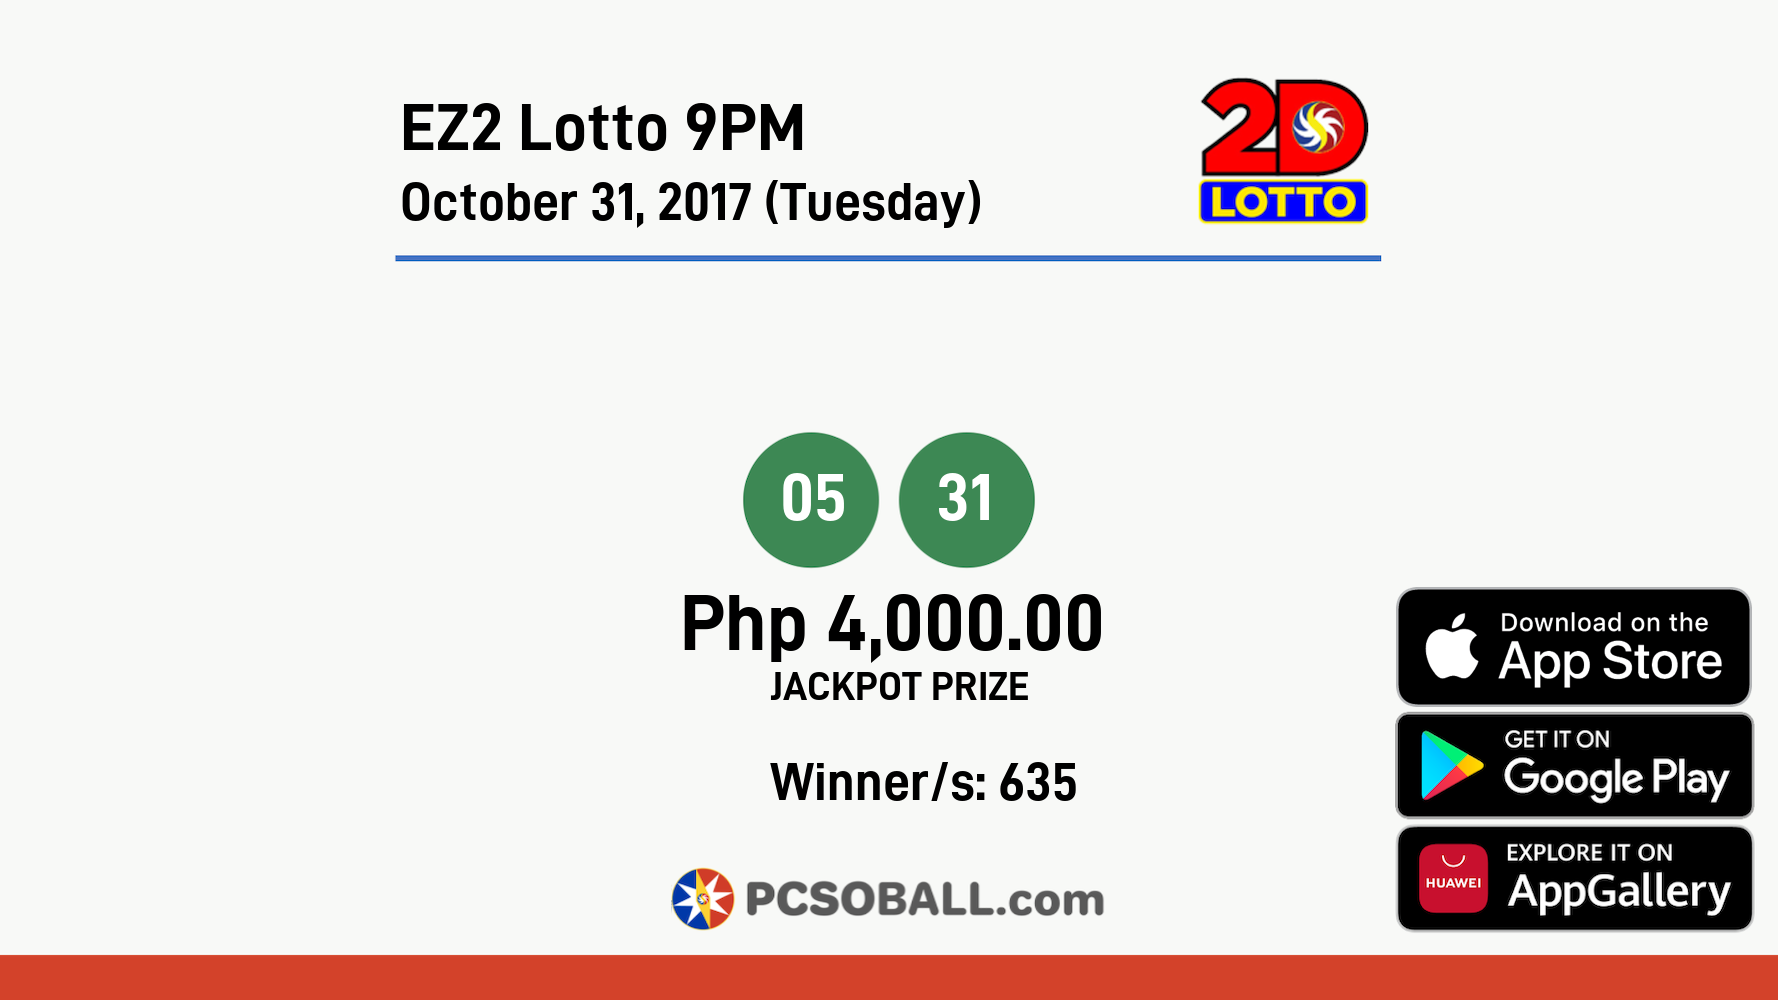 EZ2 Lotto 9PM October 31, 2017 (Tuesday) Result